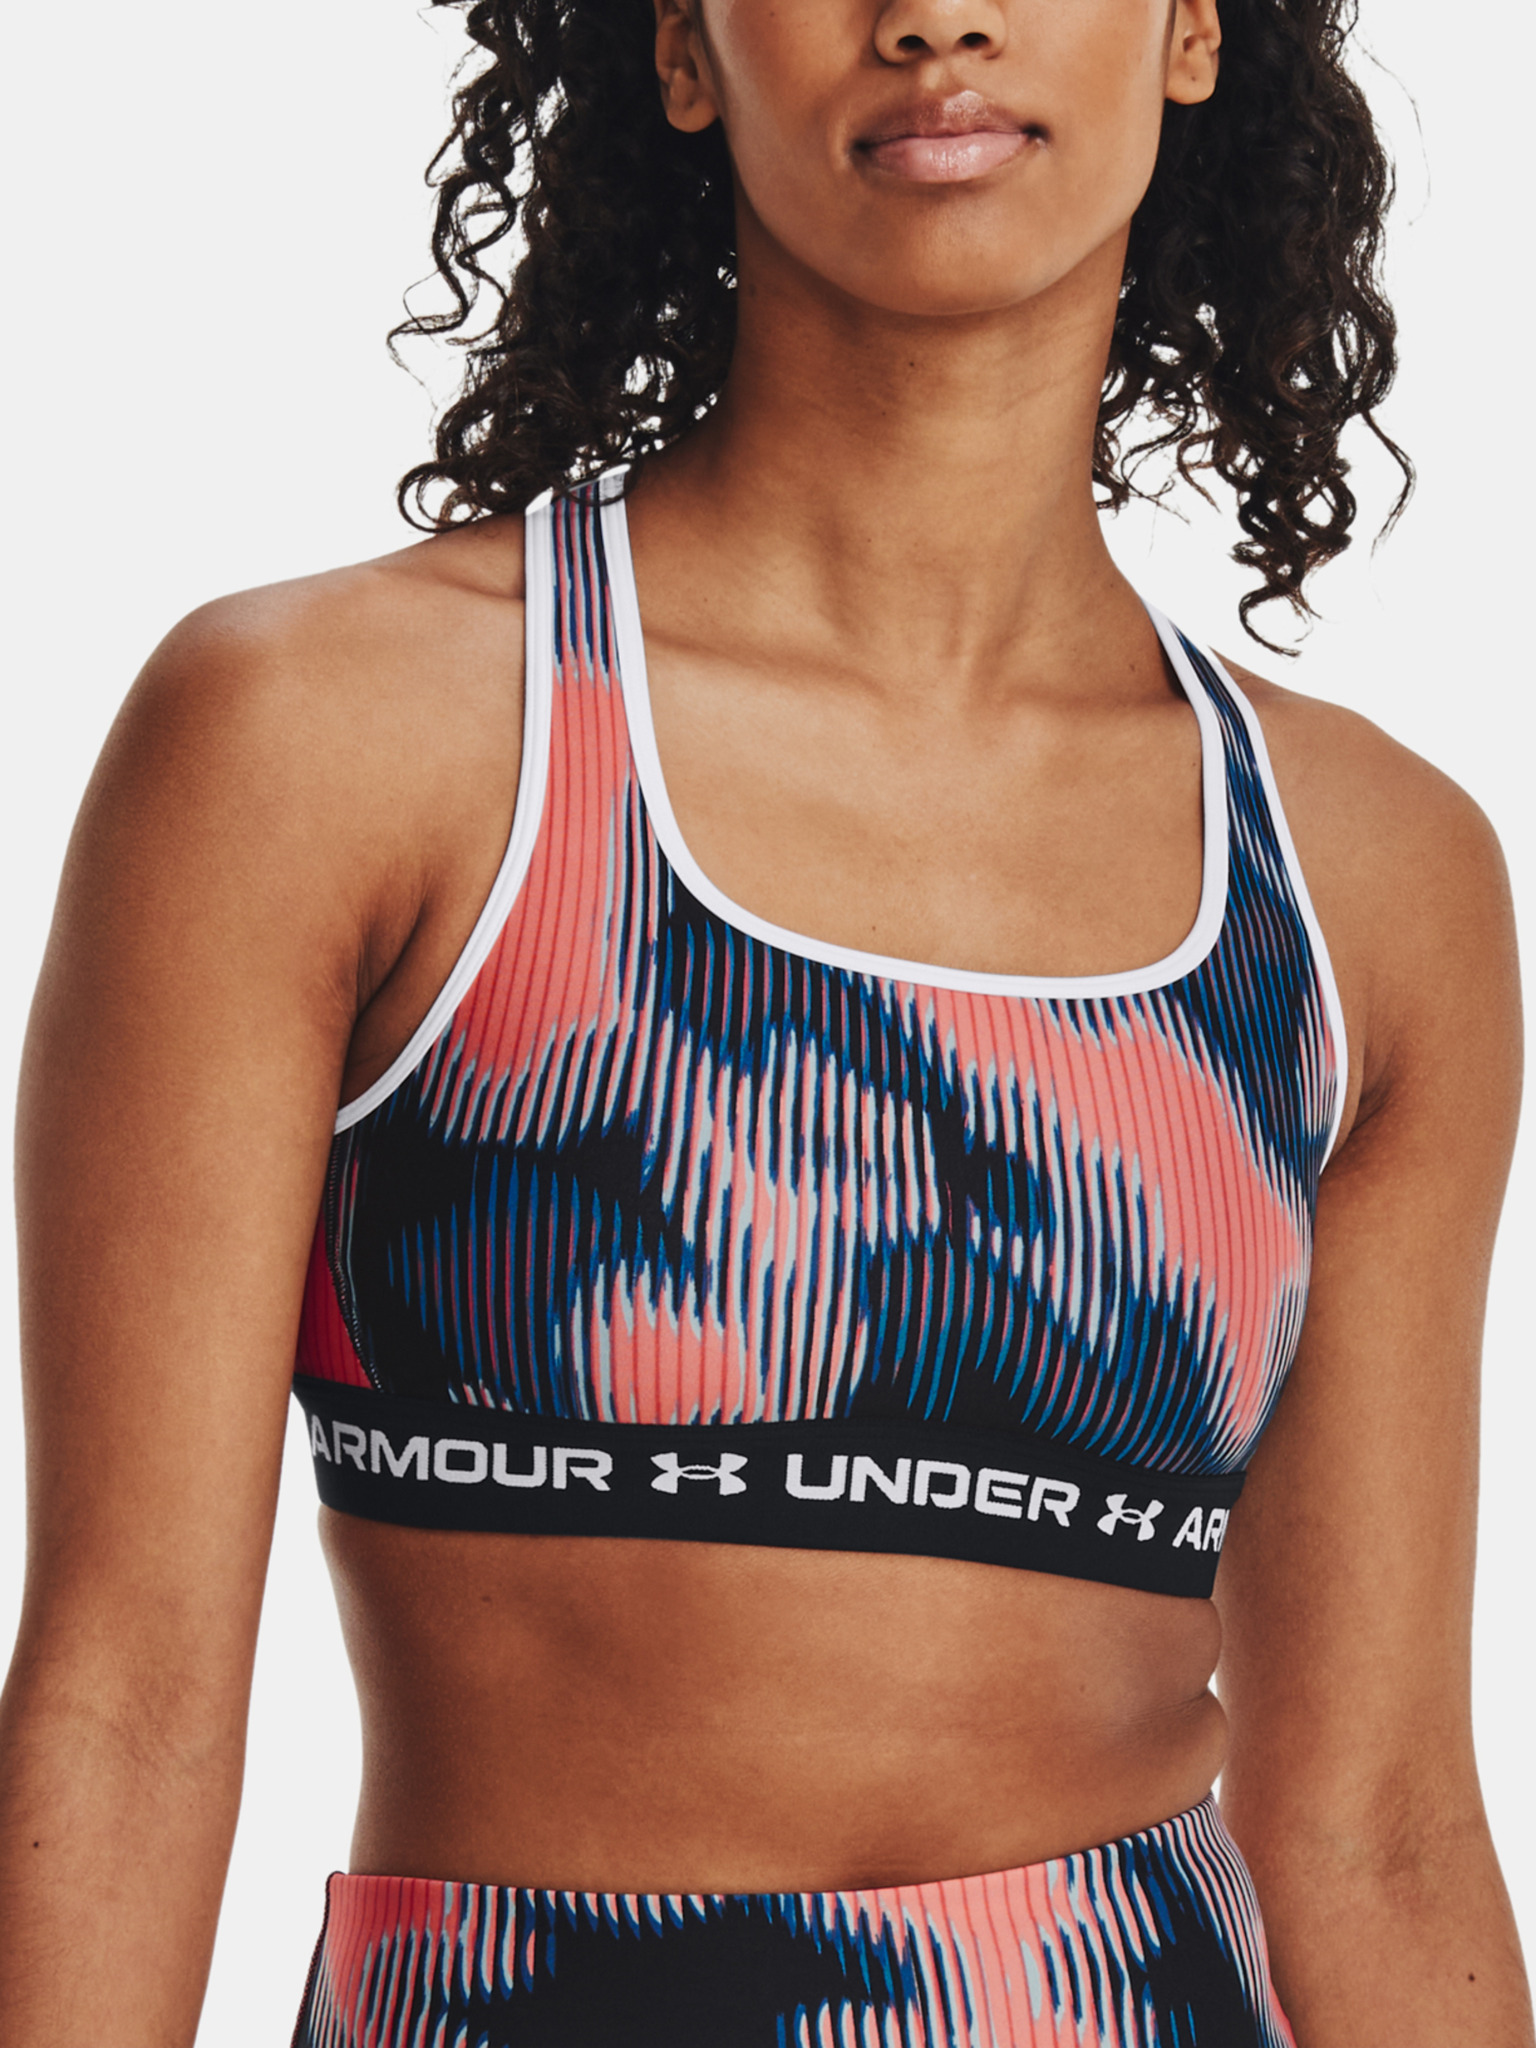 Under Armour Women's Armour® Mid Crossback Pride Sports Bra